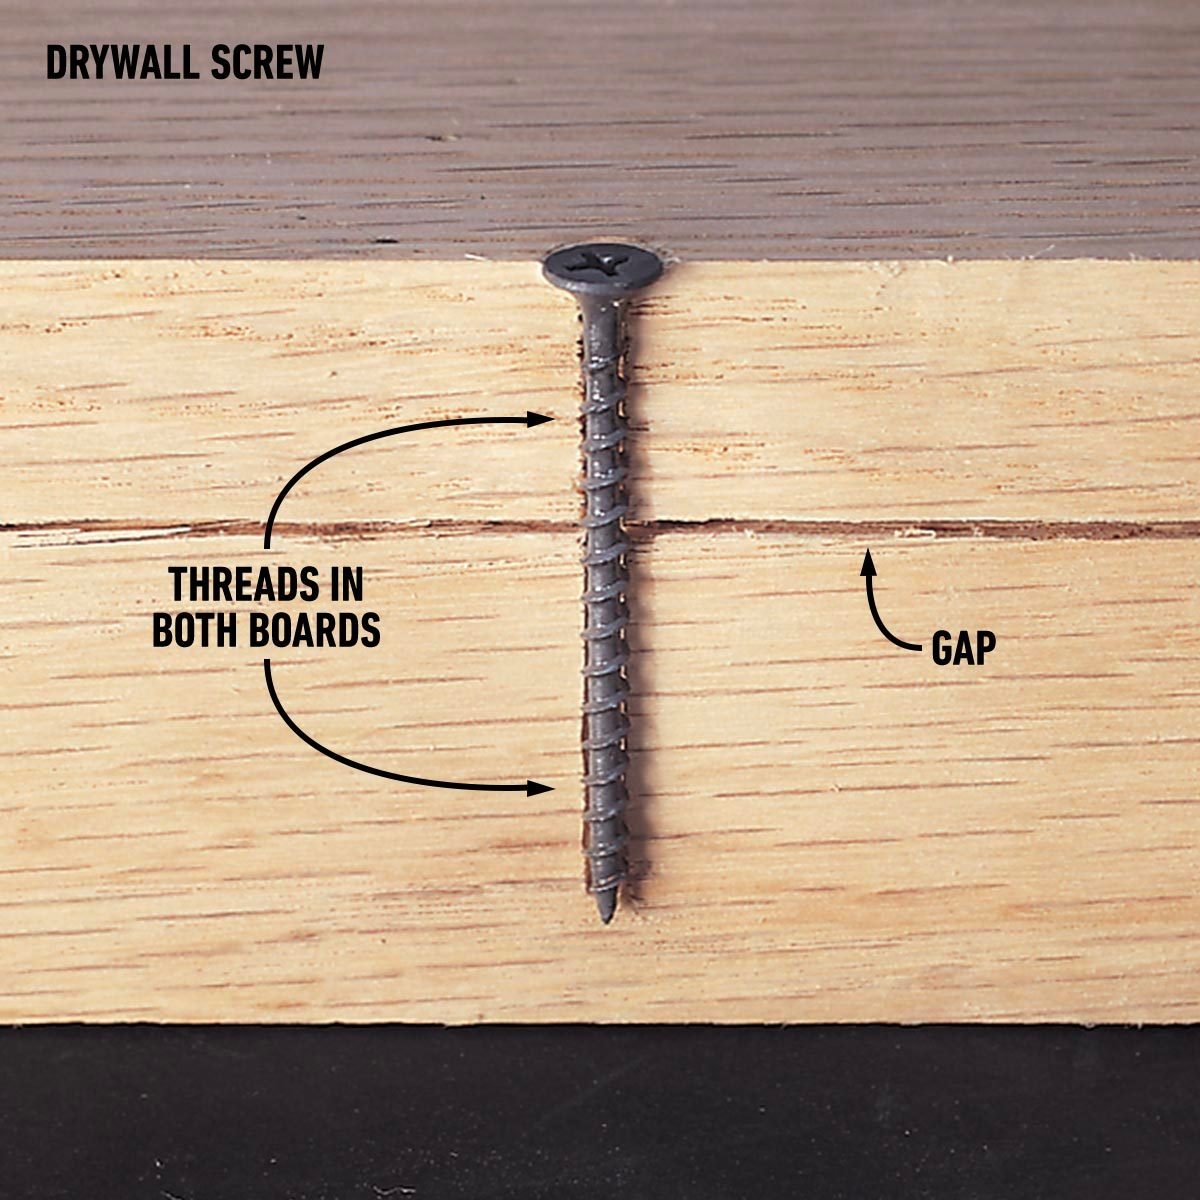 A cross section of a drywall screw holding two wooden boards together, showing a gap in the boards